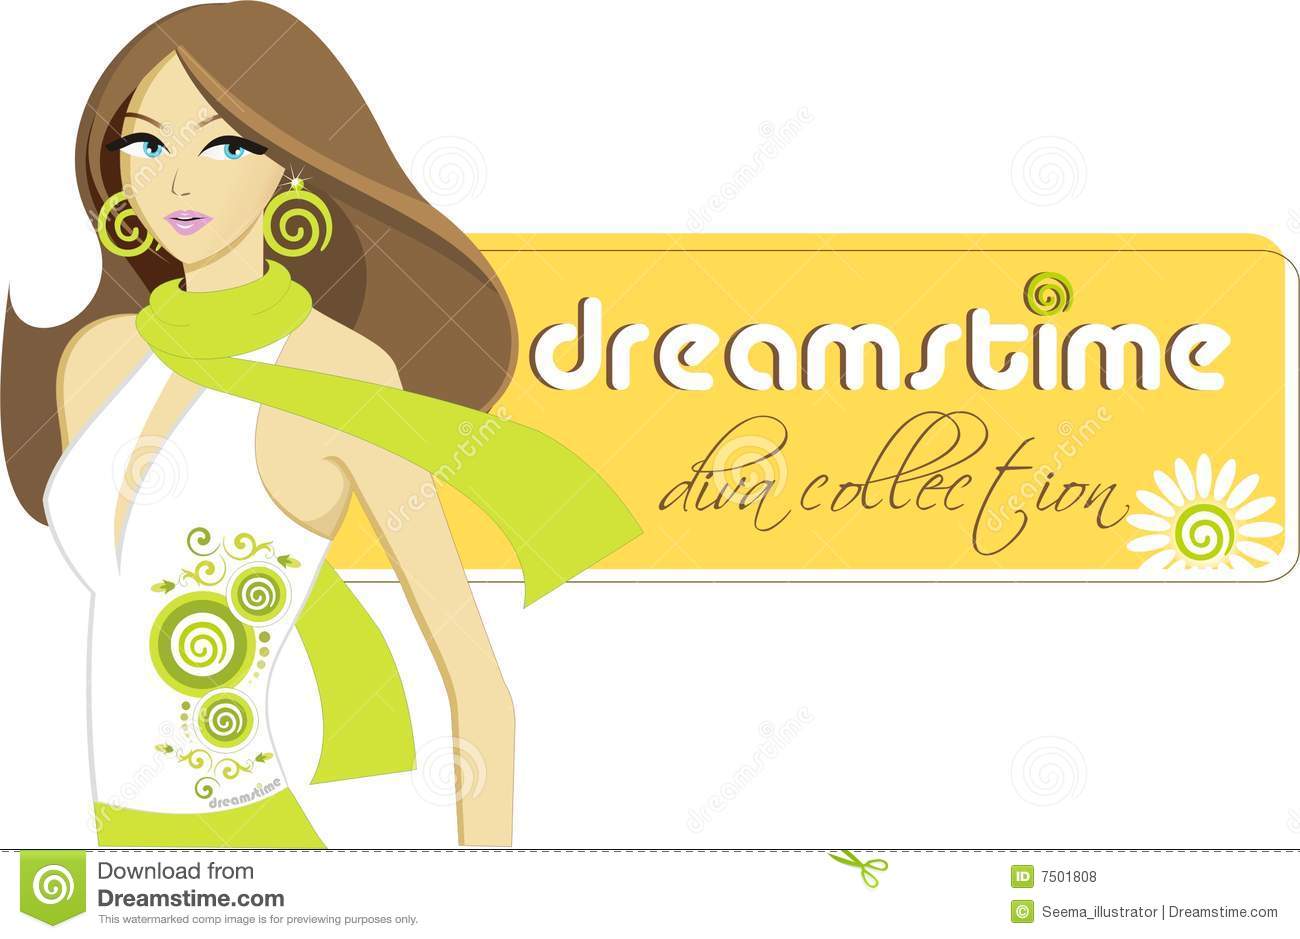 9 Dreamstime Stock Photos Free Images